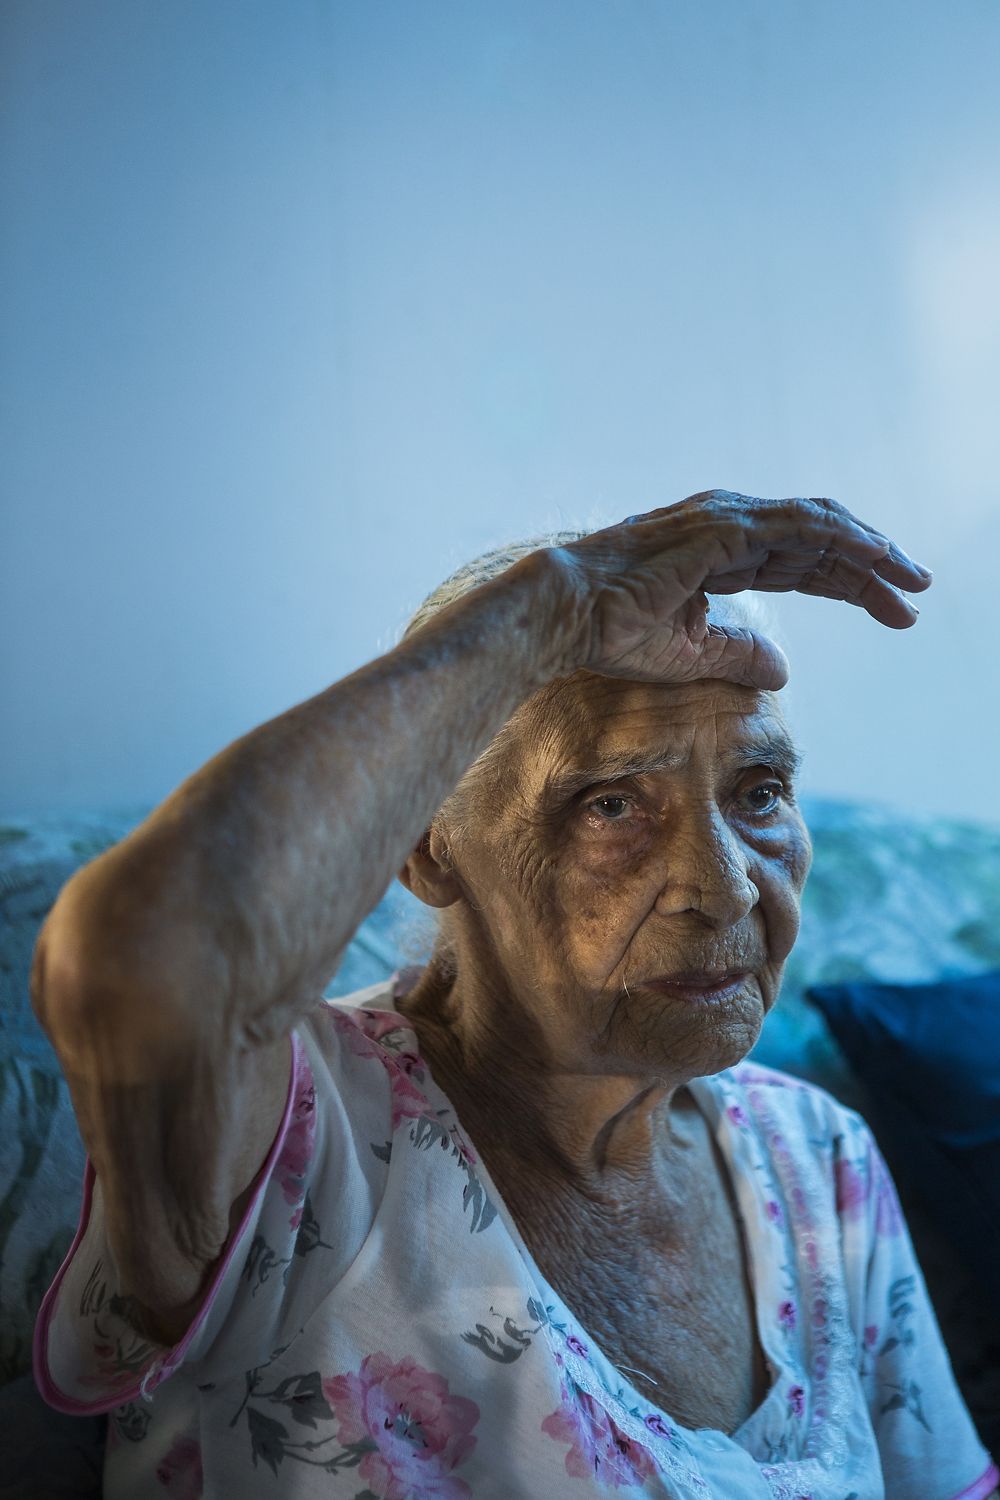 Carmen De Jesús Rodríguez, 92, of Fajardo, recounts all of the hurricanes she has lived through, including San Felipe Segundo, San Ciprian, Hugo, Georges and now Maria in her hillside home where she has lived for the past 70 years. “This was the worst hurricane I have witnessed. It came with a different intensity.” Rodríguez said. “The sound was horrific and the rain and wind remained violent for more than 12 hours.” Image by Ryan Michalesko. Puerto Rico, 2017.